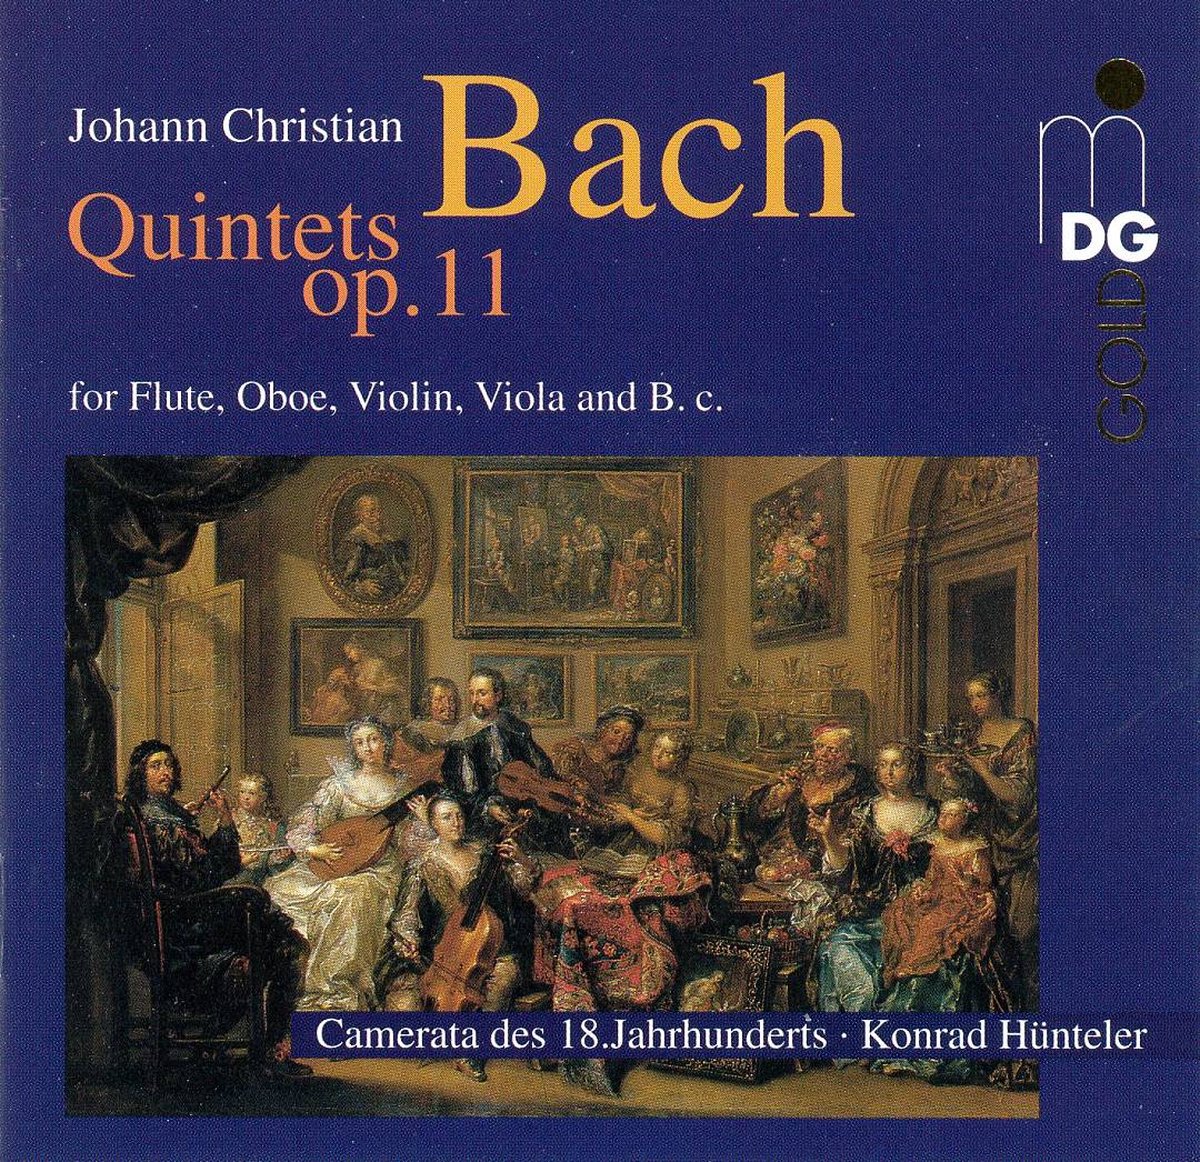 Afbeelding van product Outhere  J. C. Bach: Quintets op. 11 / Camerata des 18. Jahrhunderts